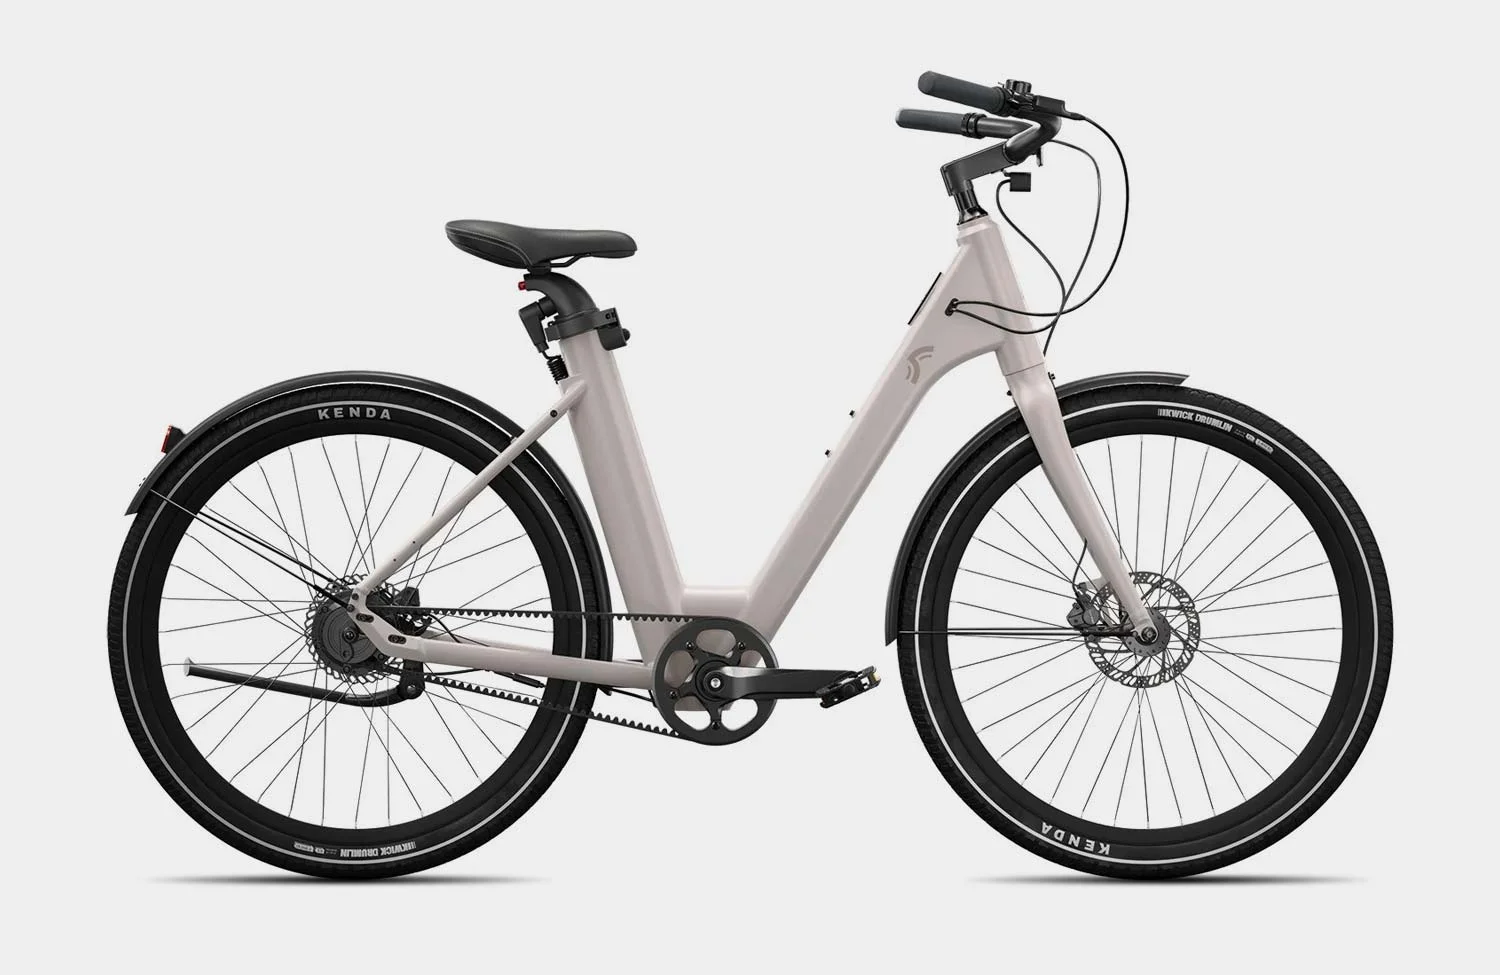 On sale again: the currently Urban available for is 1,199 euros! — Lidl e-bike